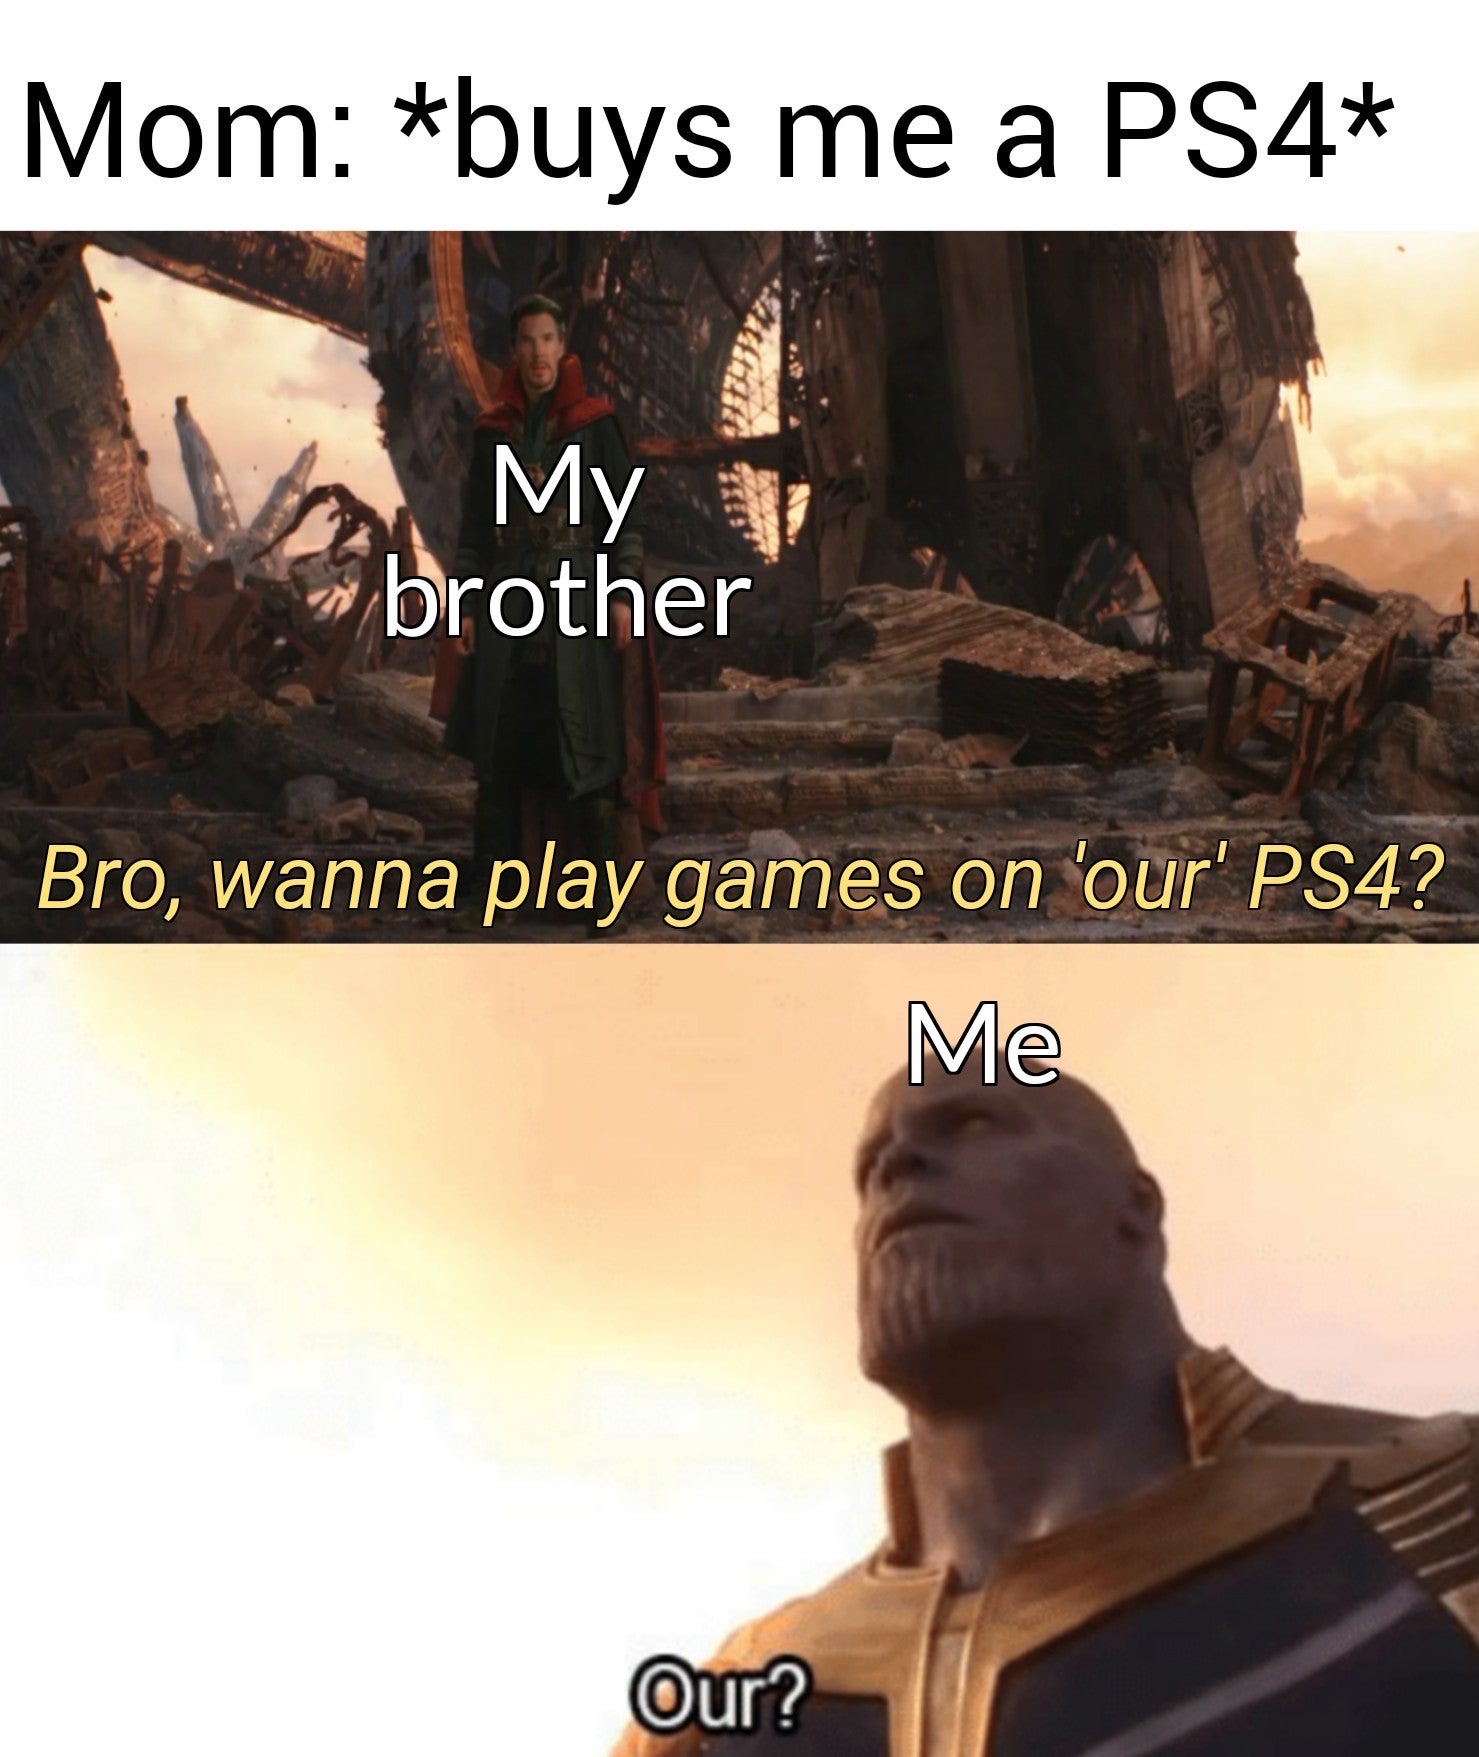 ps4 meme - Mom buys me a PS4 My brother | Bro, wanna play games on 'our' PS4? Me Our?